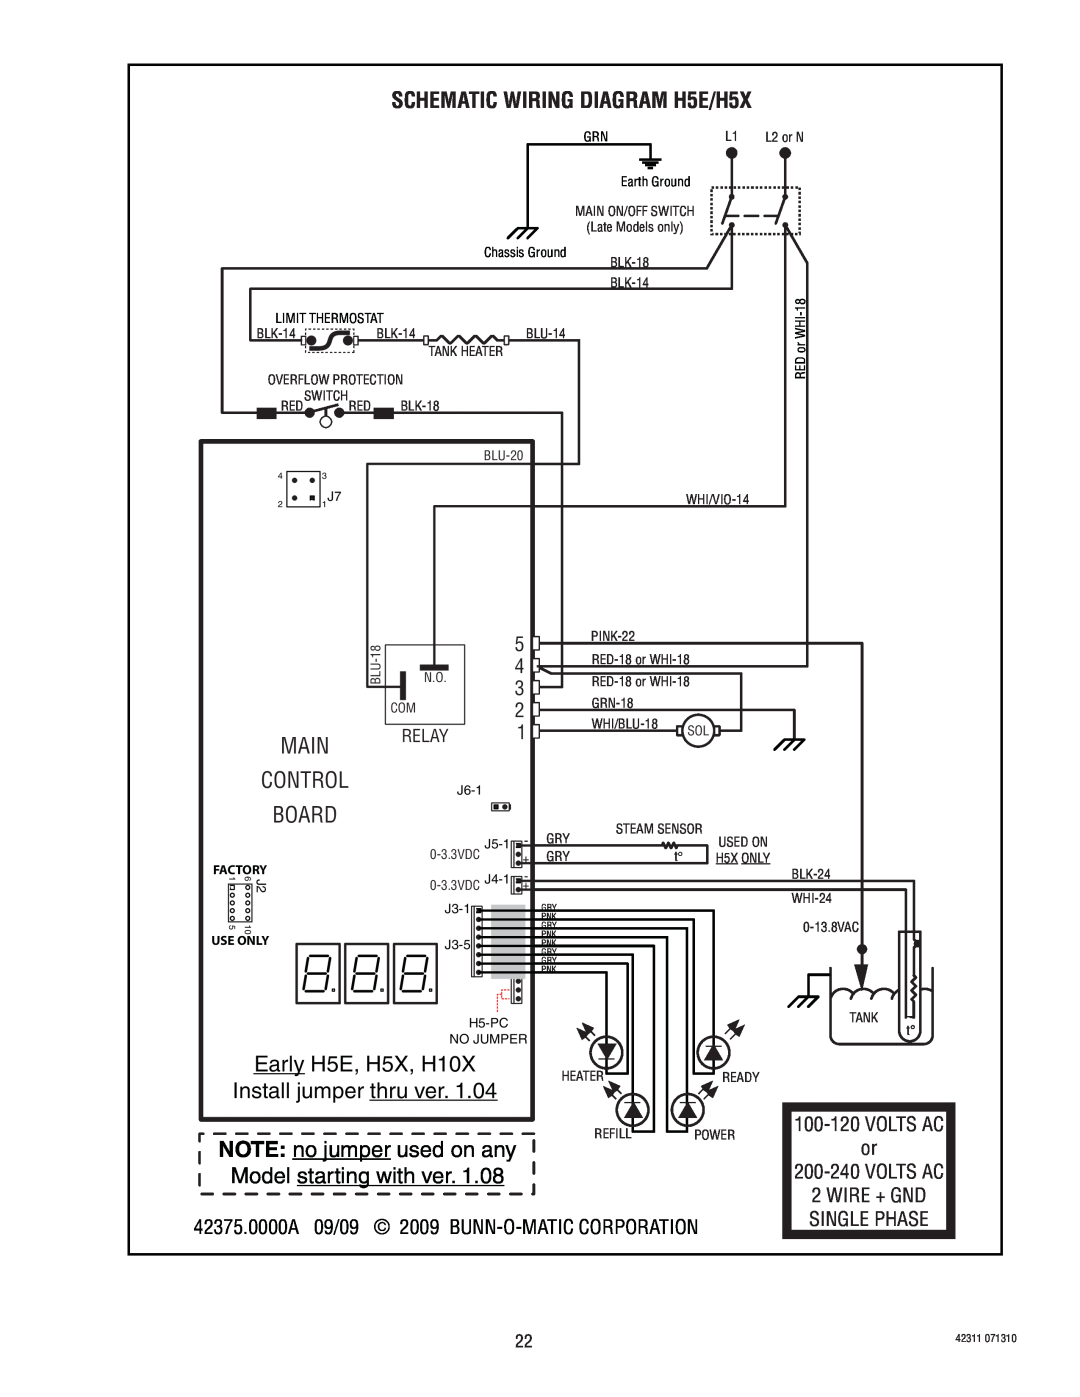 Bunn Main, SCHEMATIC WIRING DIAGRAM H5E/H5X, Early H5E, H5X, H10X, Install jumper thru ver, NOTE no jumper used on any 